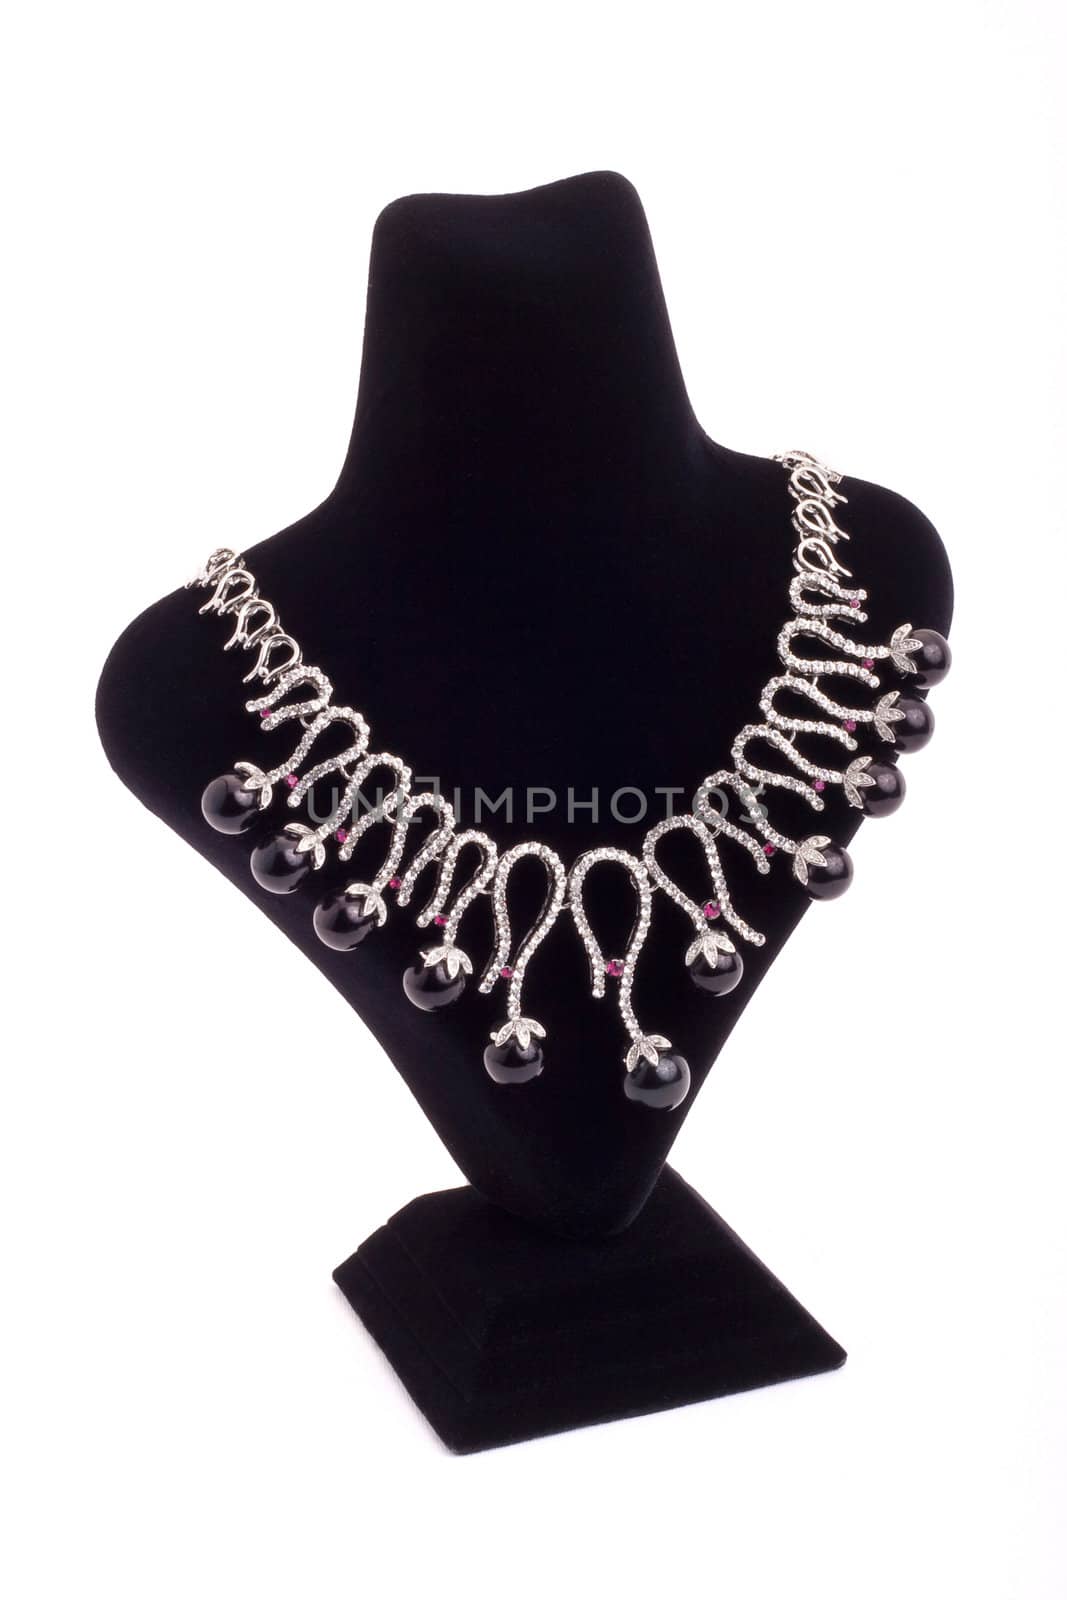 Necklace with black pearls on black stand